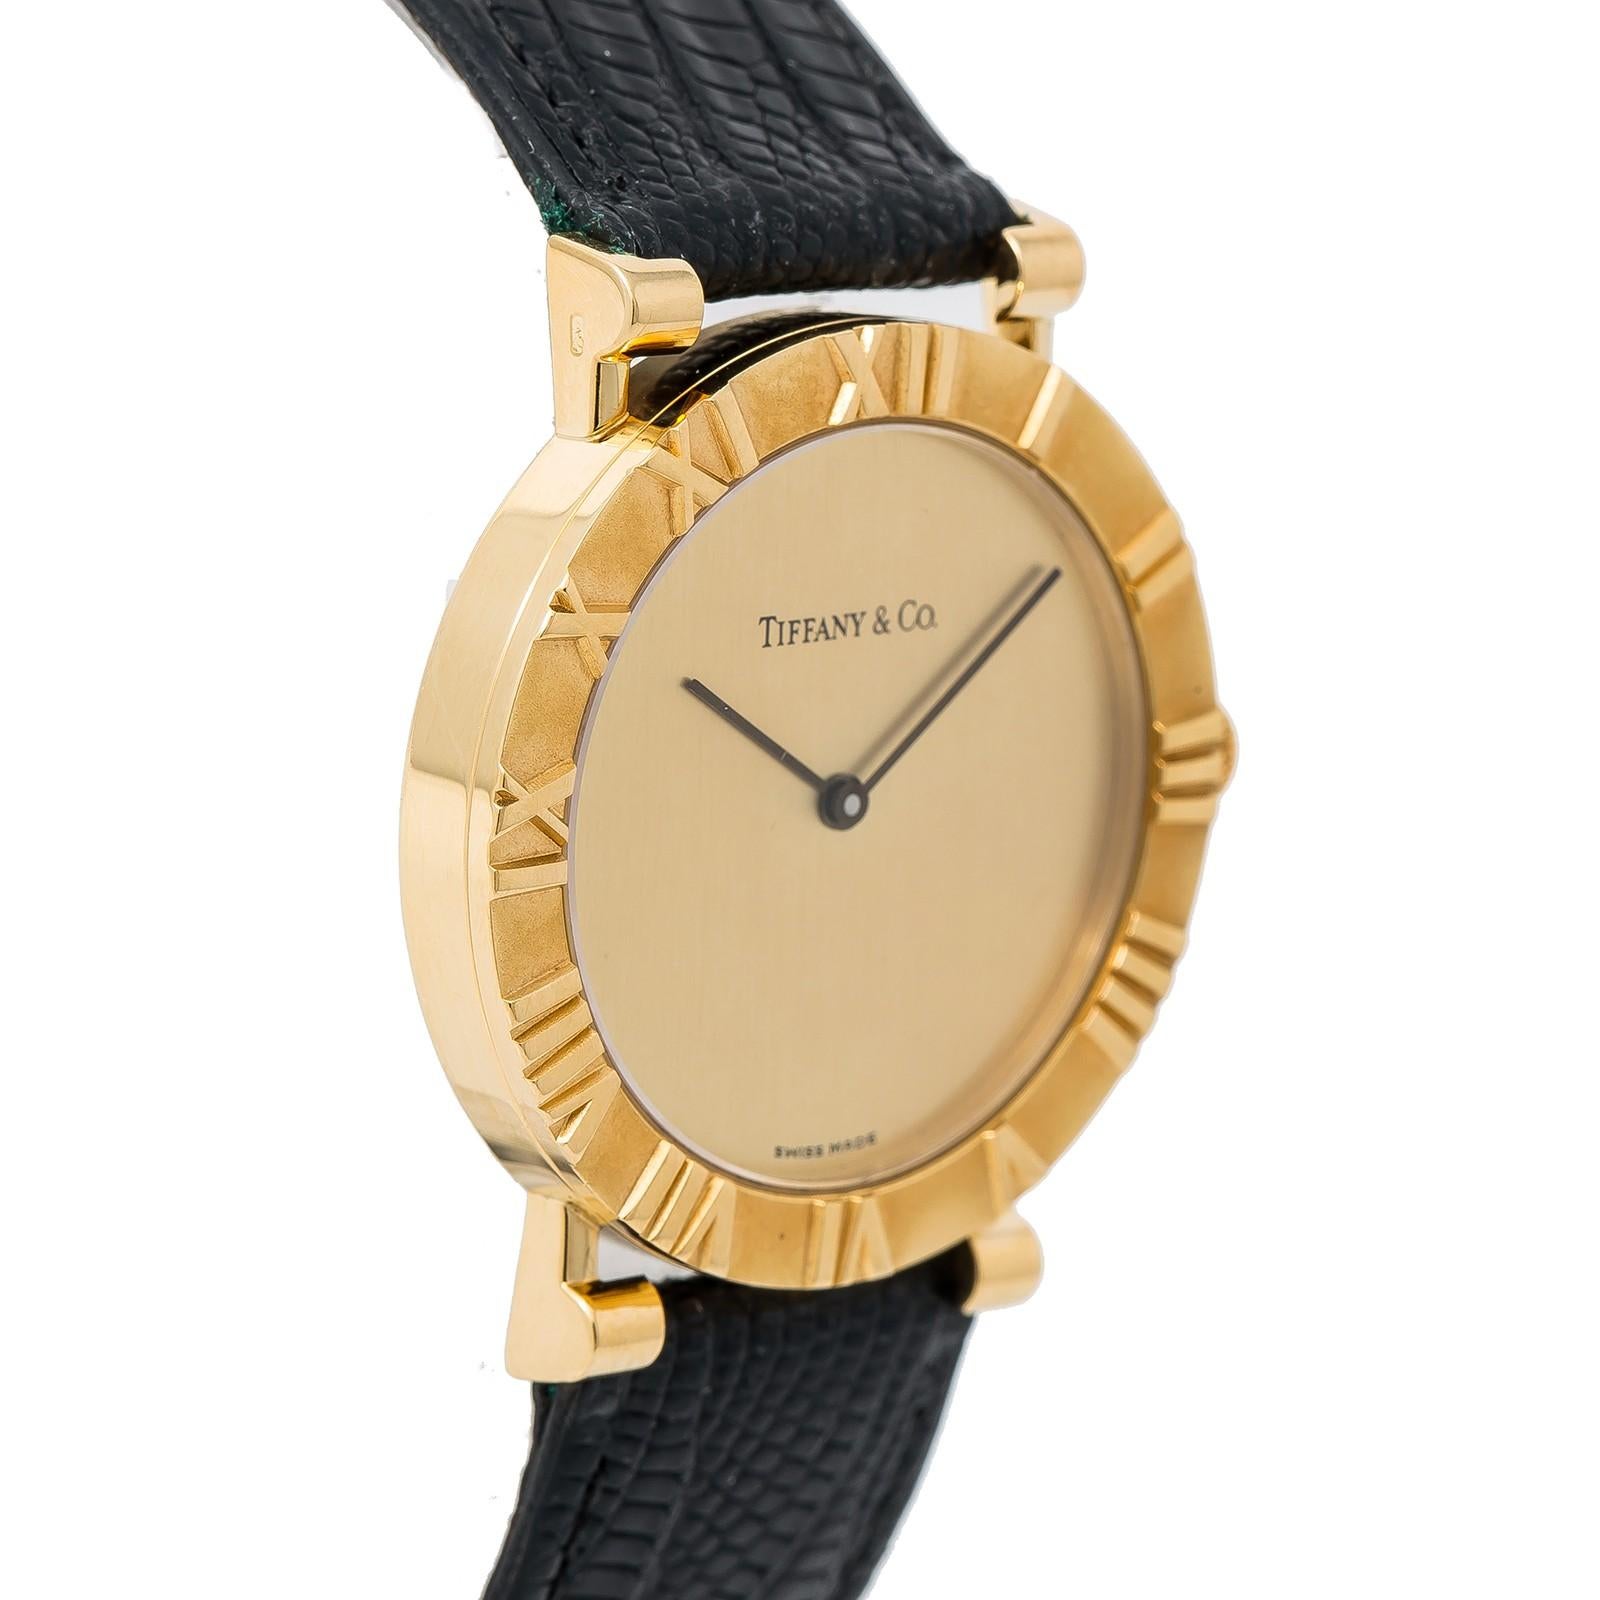 Contemporary Tiffany & Co. Atlas M0630 With 7 mm Band, Yellow-Gold Bezel & Gold Dial